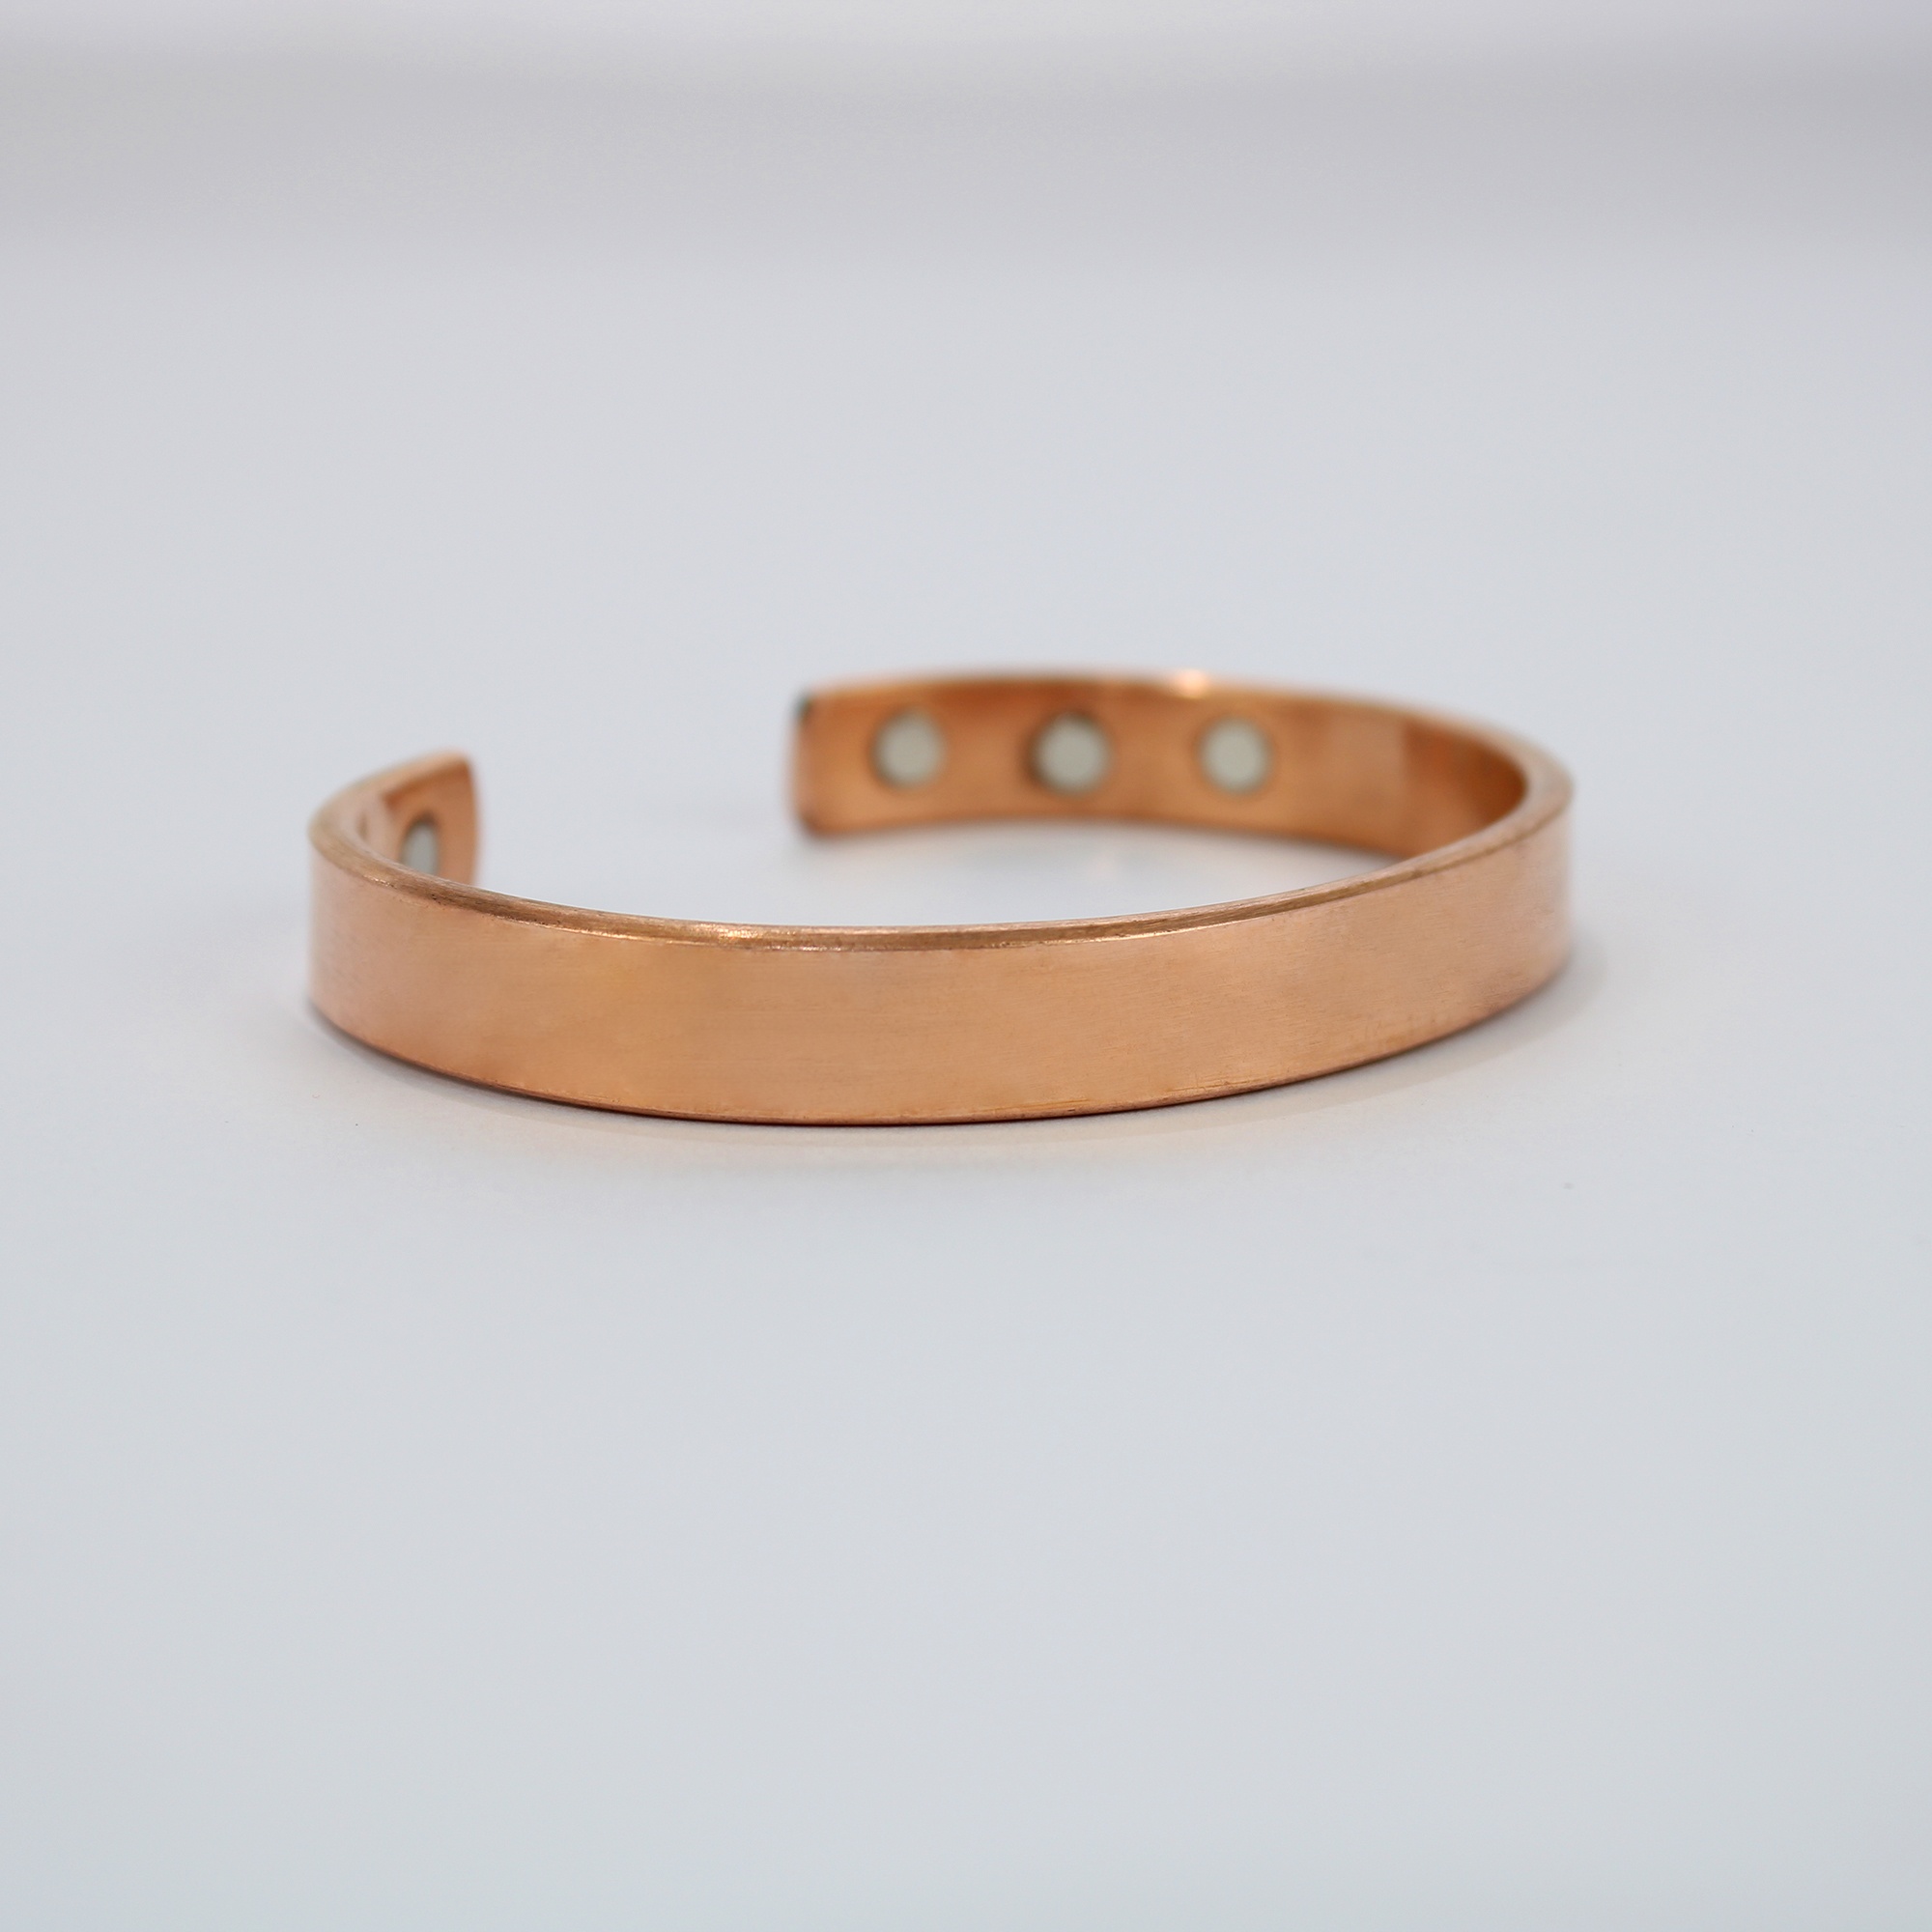 Pure Copper Magnet Bracelet & Ring with Gift Box (Design 1)